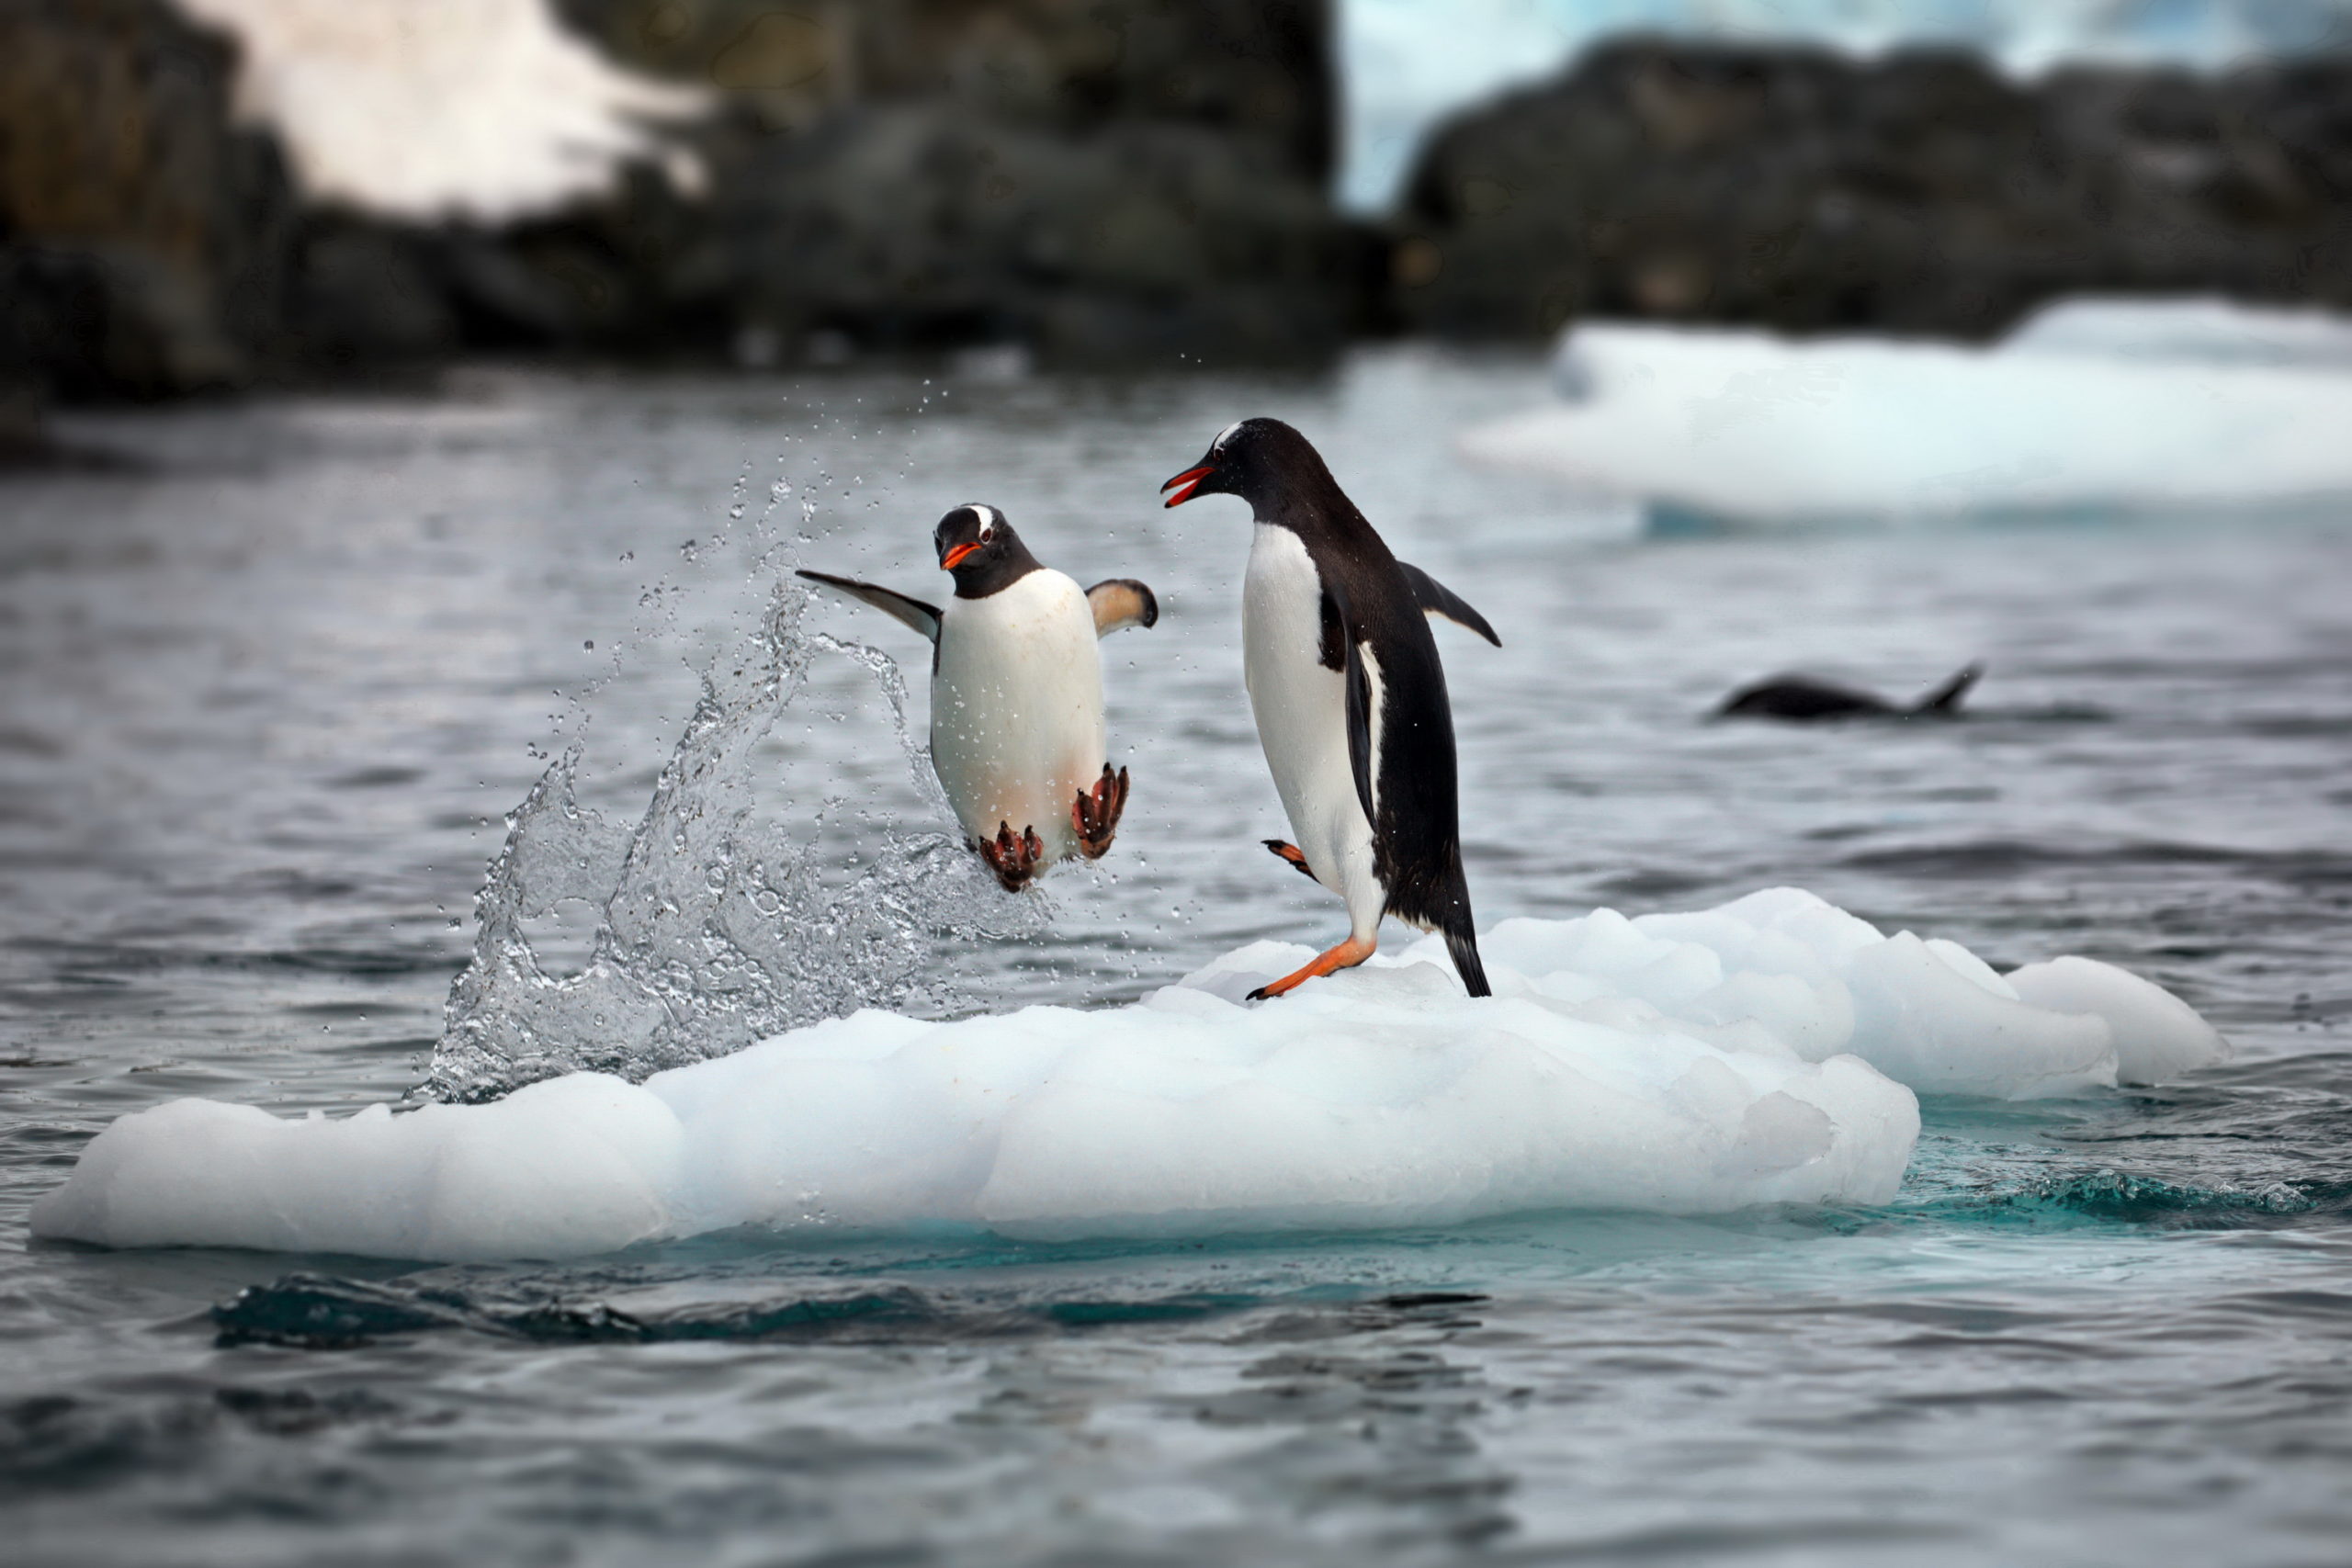 Penguin jumping out of the water